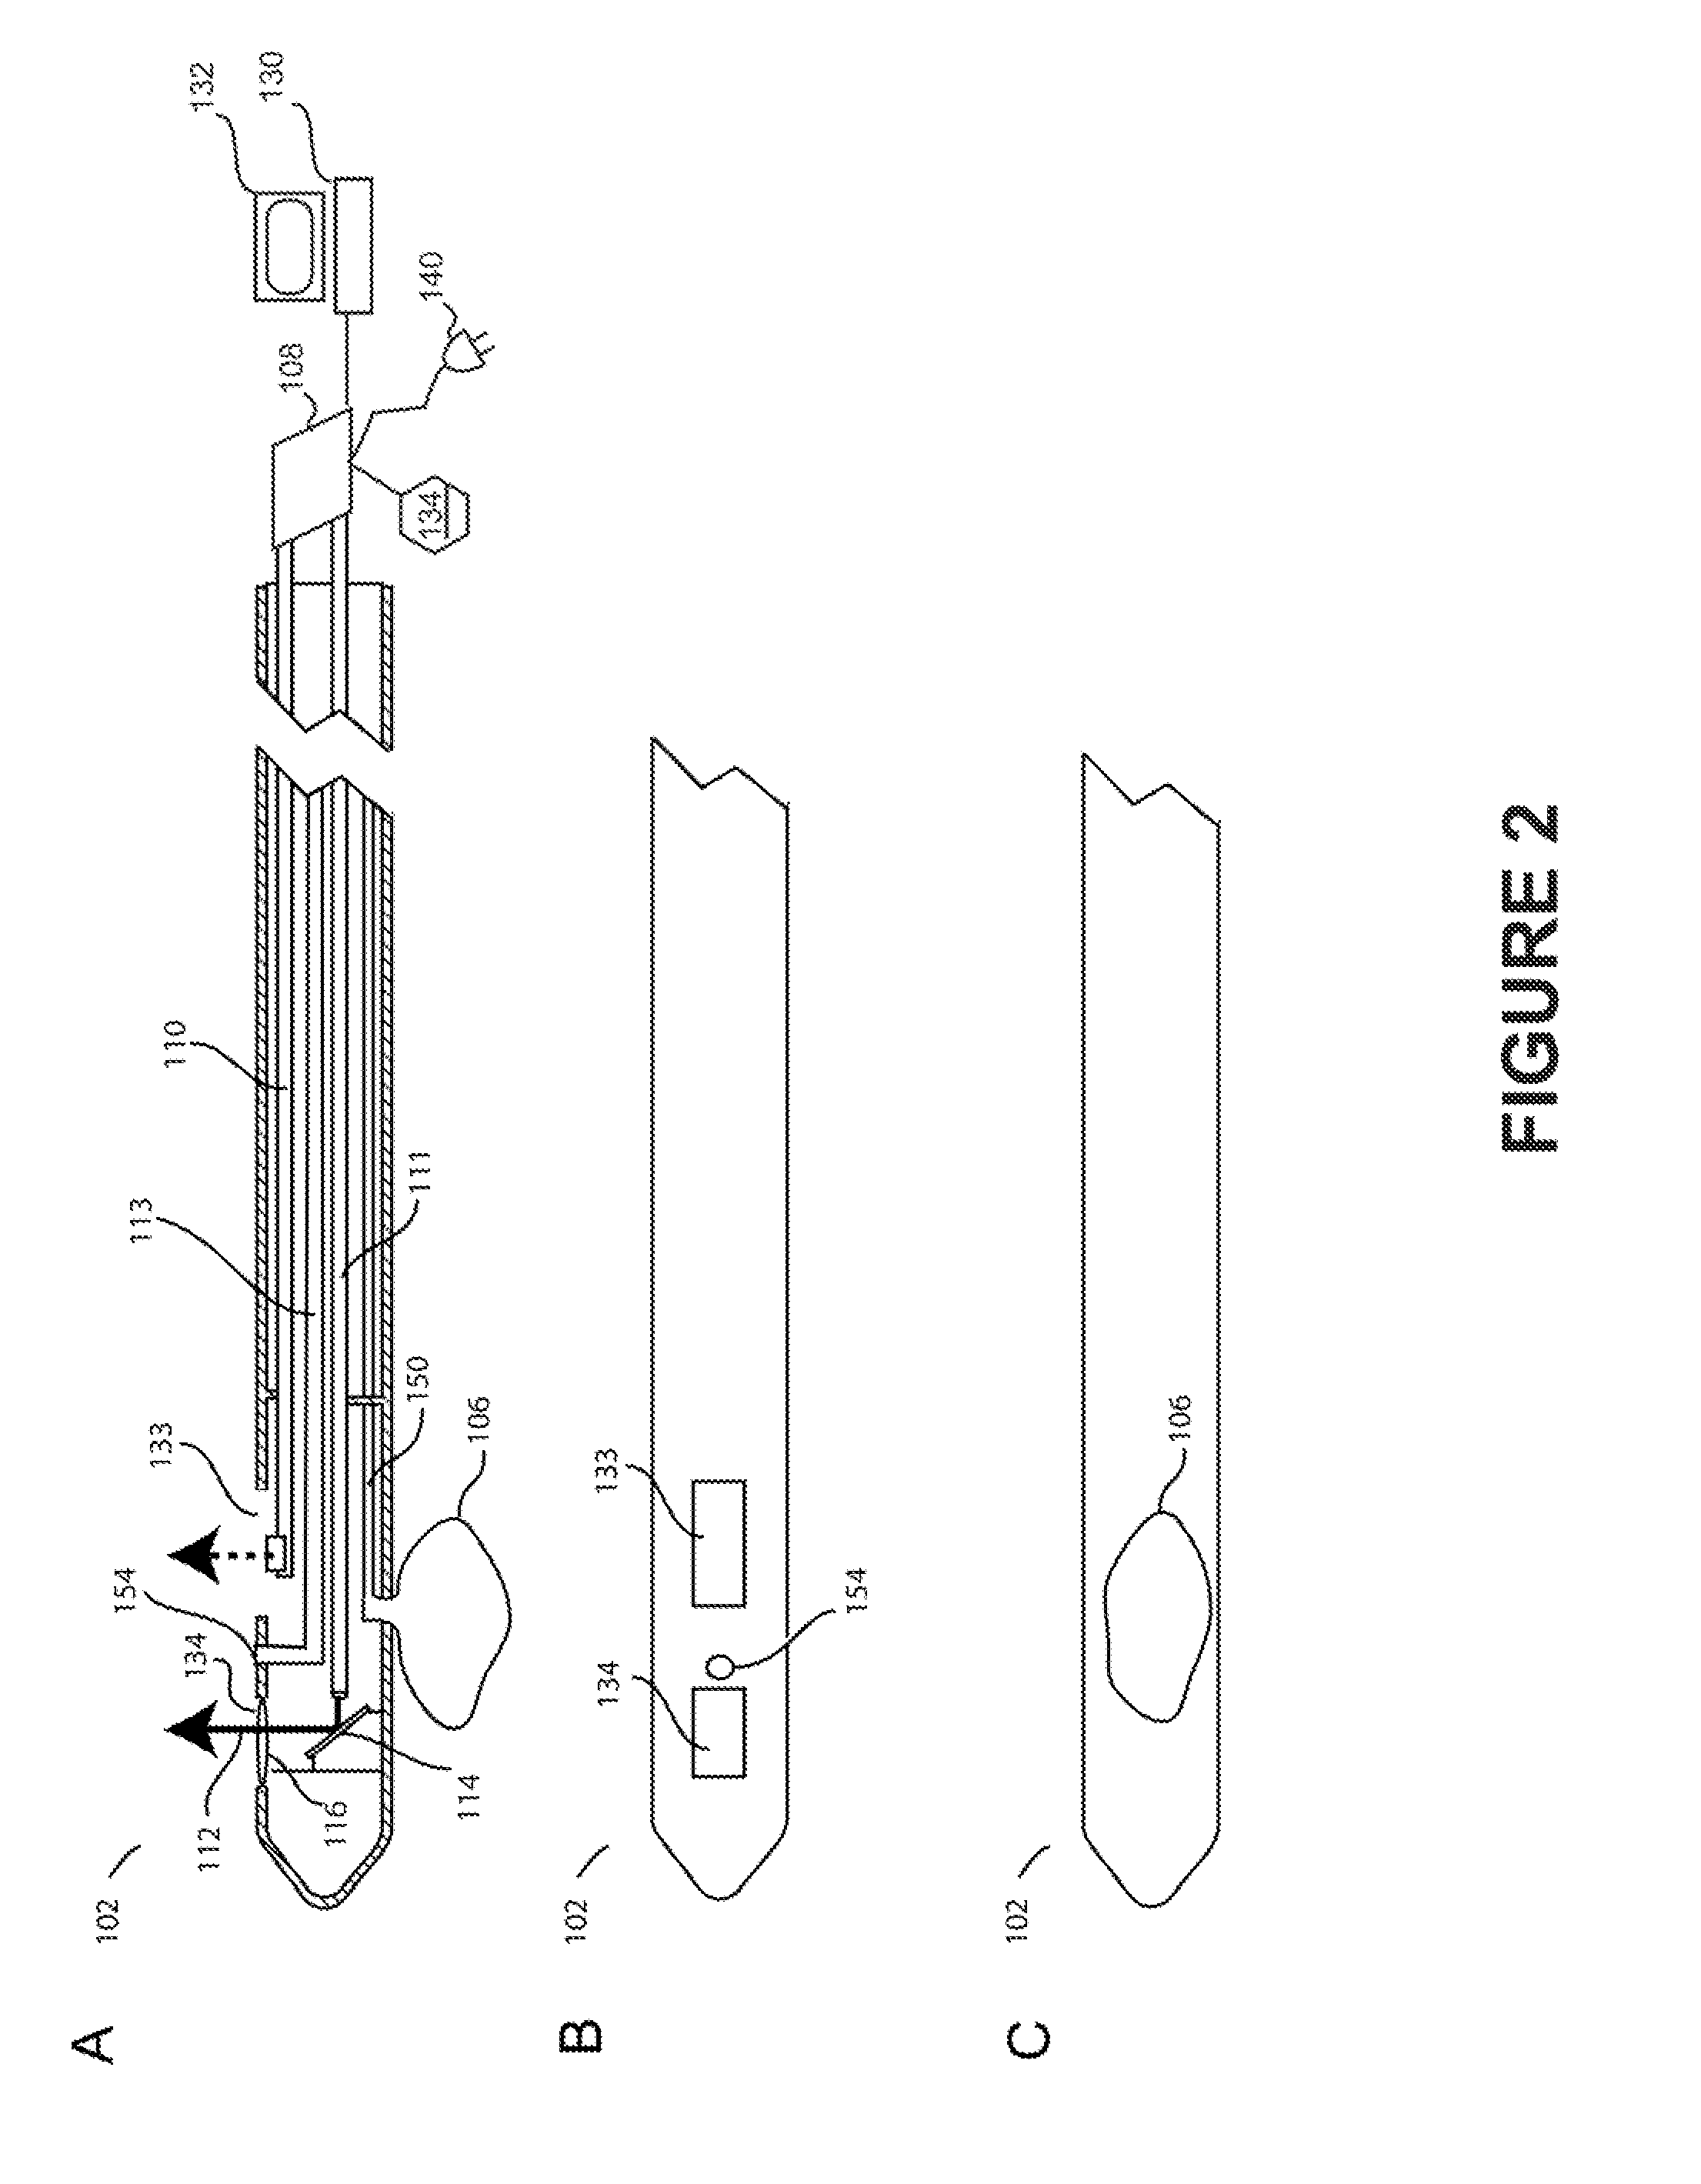 Device for reducing renal sympathetic nerve activity